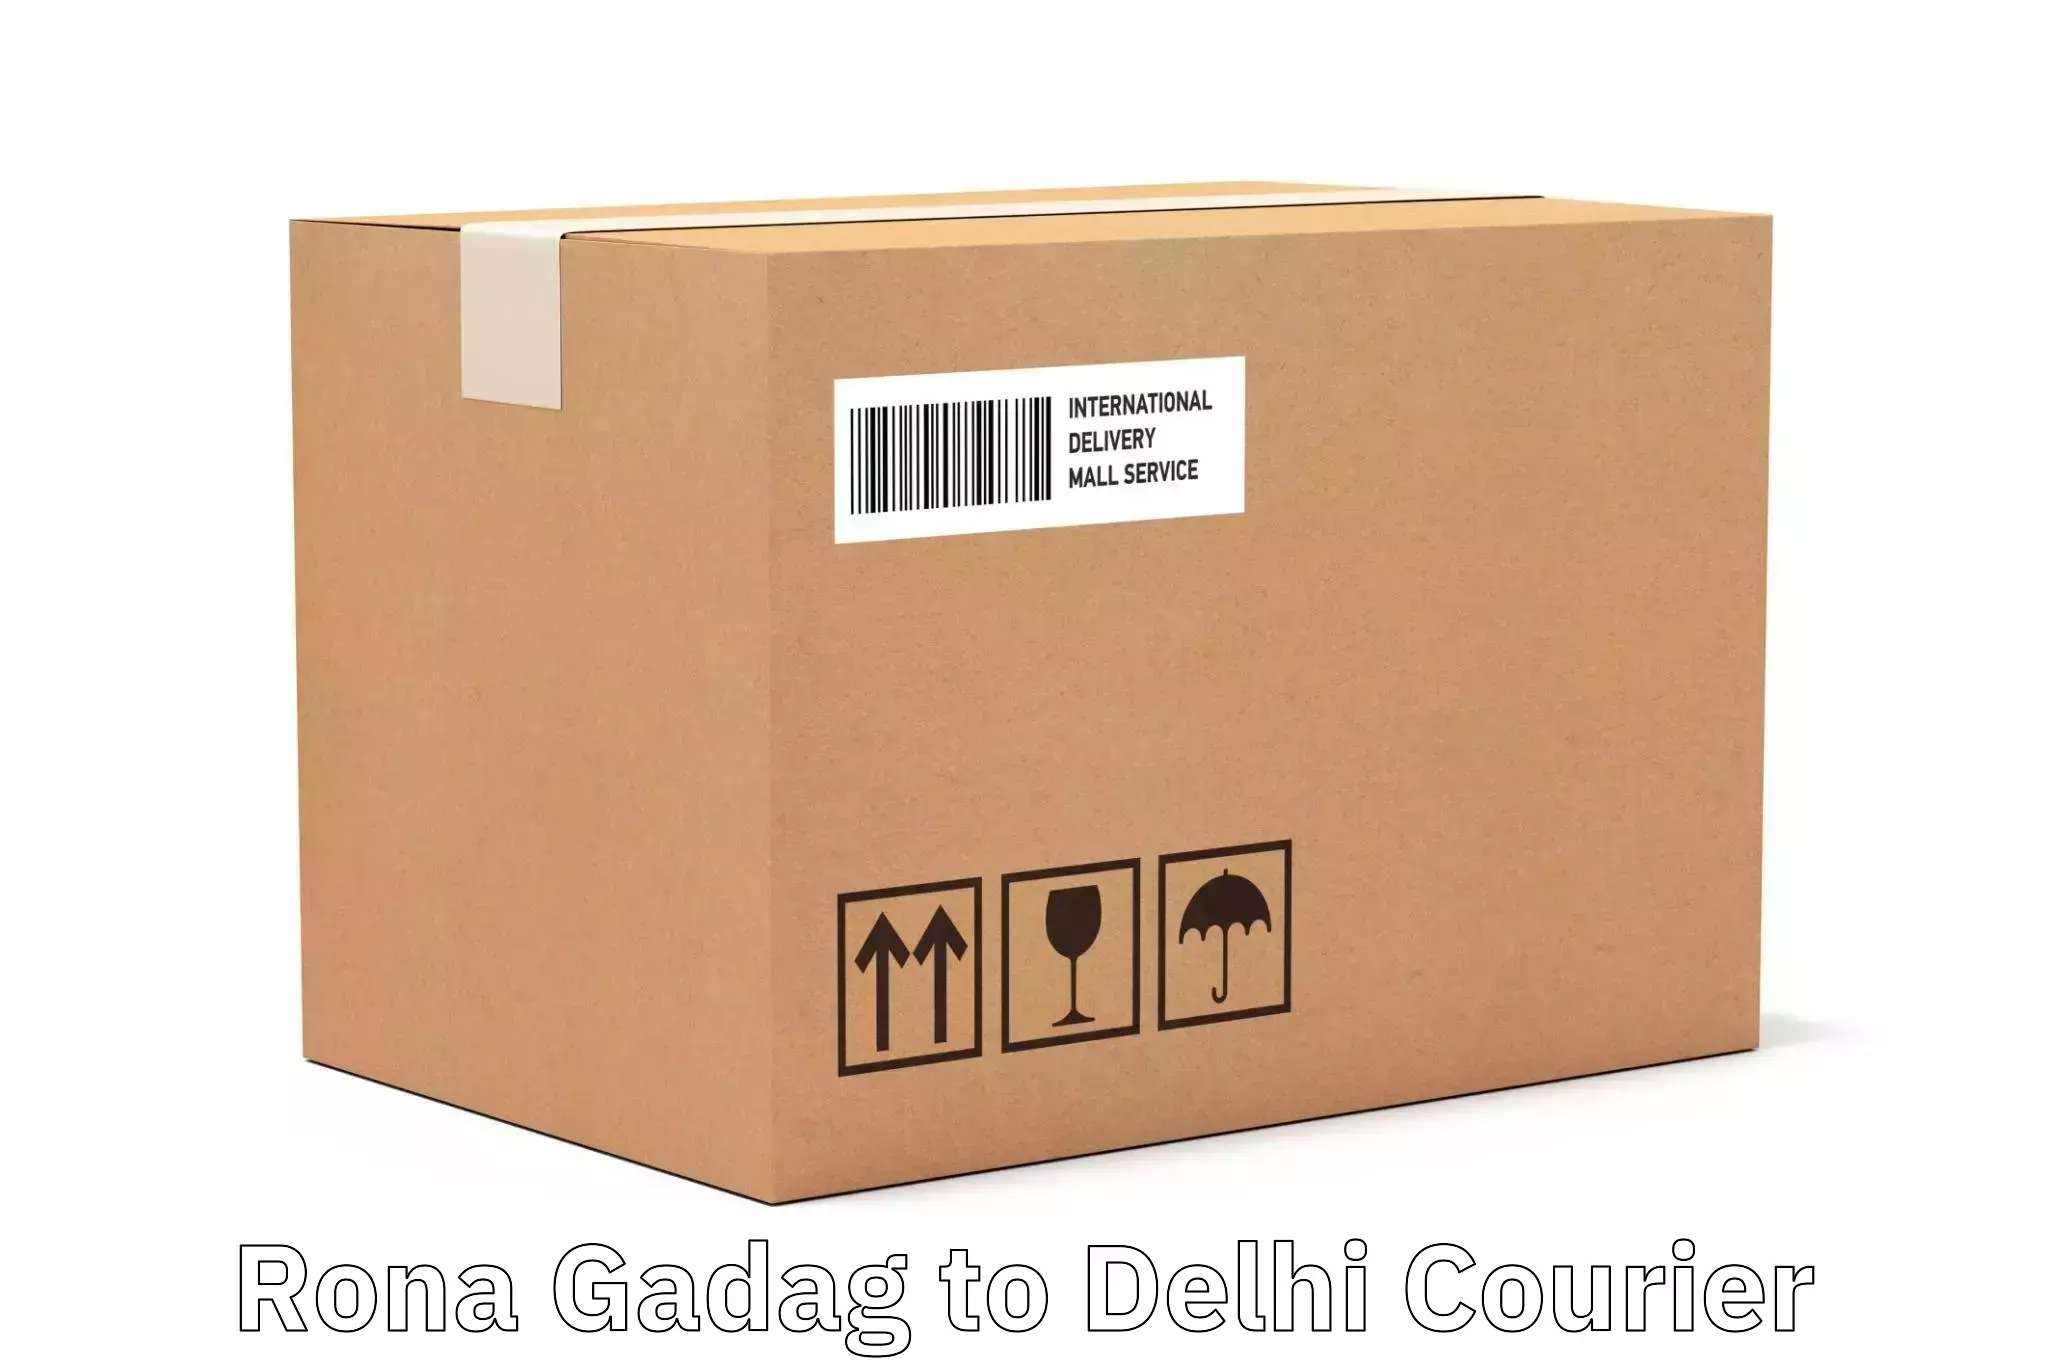 Domestic delivery options in Rona Gadag to Lodhi Road